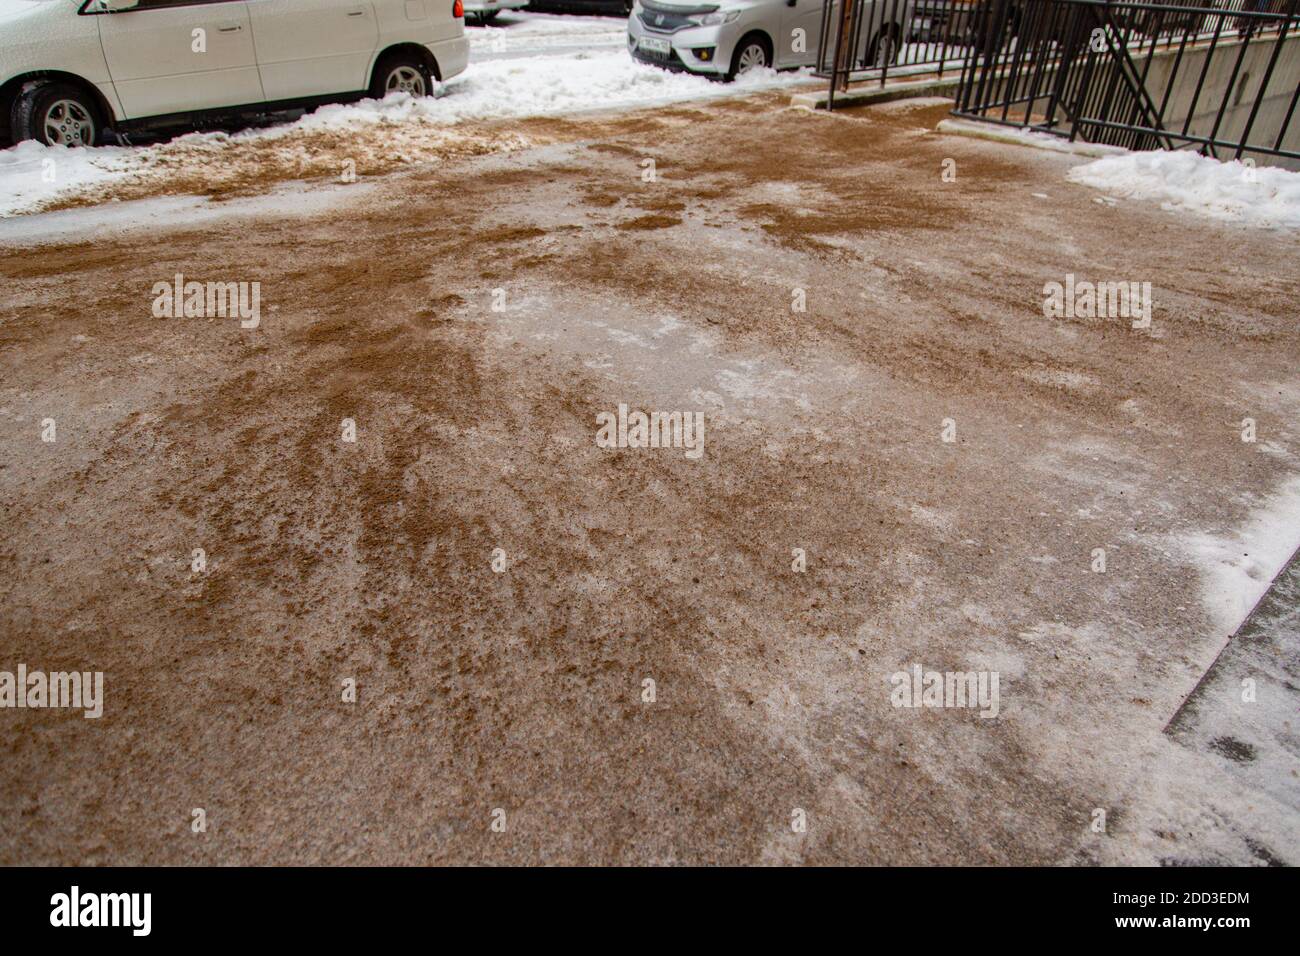 Sand is sprinkled over icy asphalt, snow-covered concrete tiles for people to resist slipping. Stock Photo